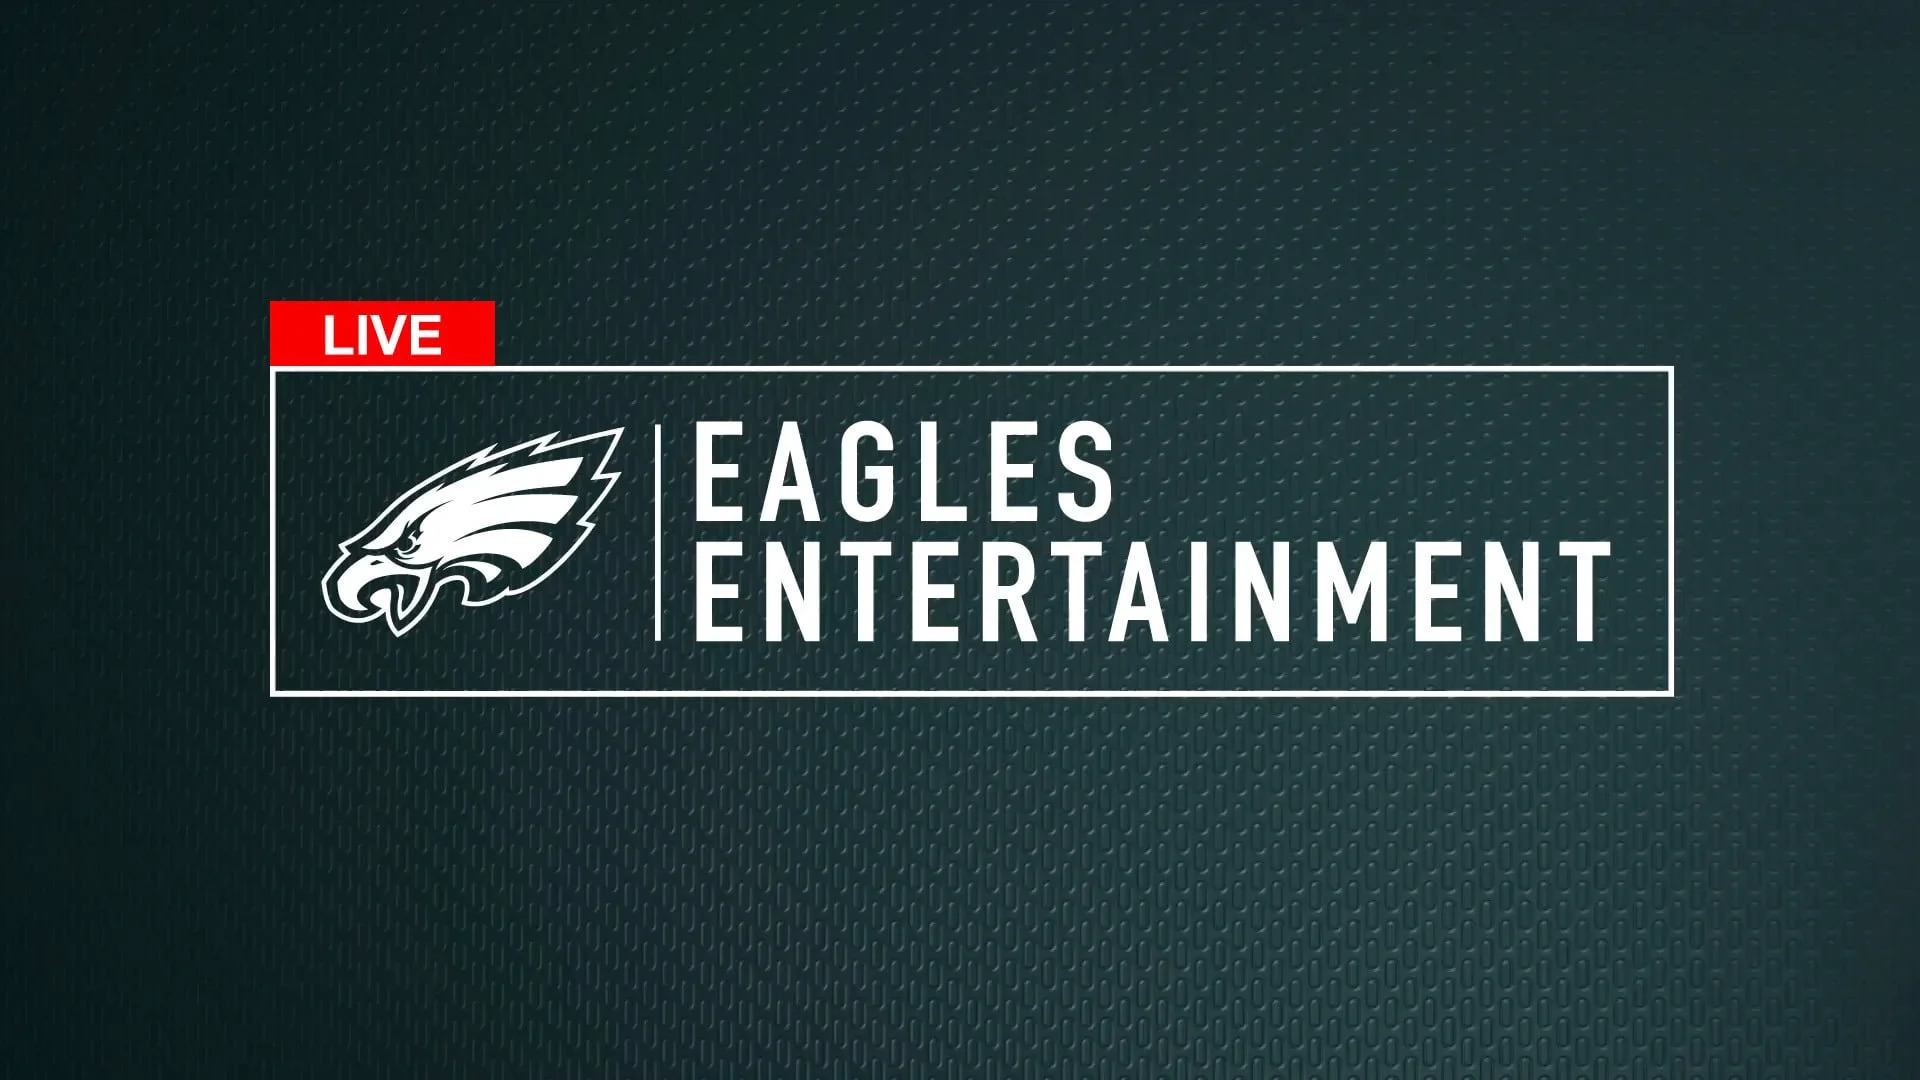 LIVE: Eagles Send Off Party to Super Bowl LVII on Vimeo